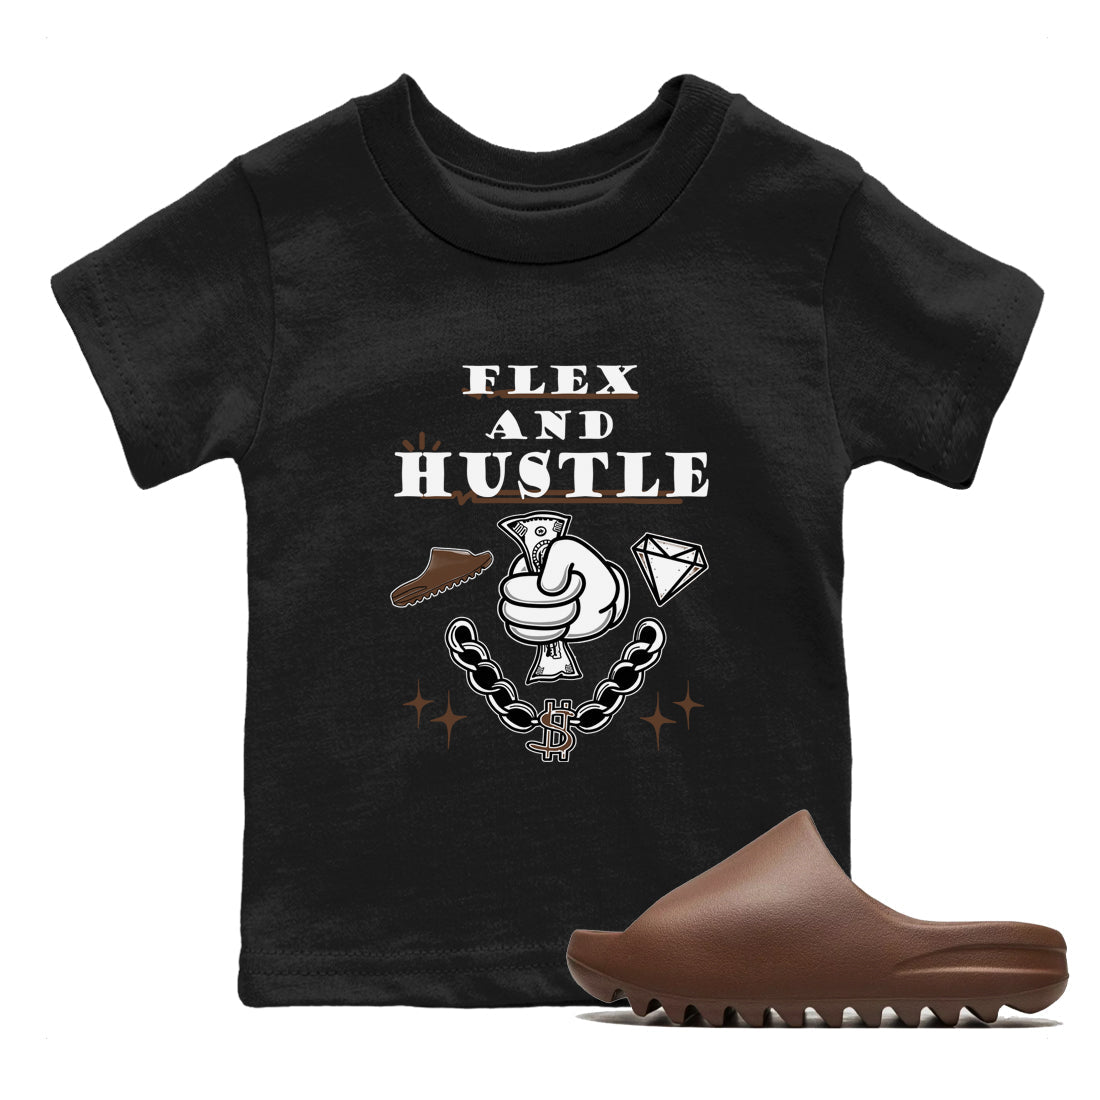 Yeezy Slide Flax shirts to match jordans Flex And Hustle sneaker match tees Yeezy Slide Flax SNRT Sneaker Tees streetwear brand Baby and Youth Black 1 cotton tee